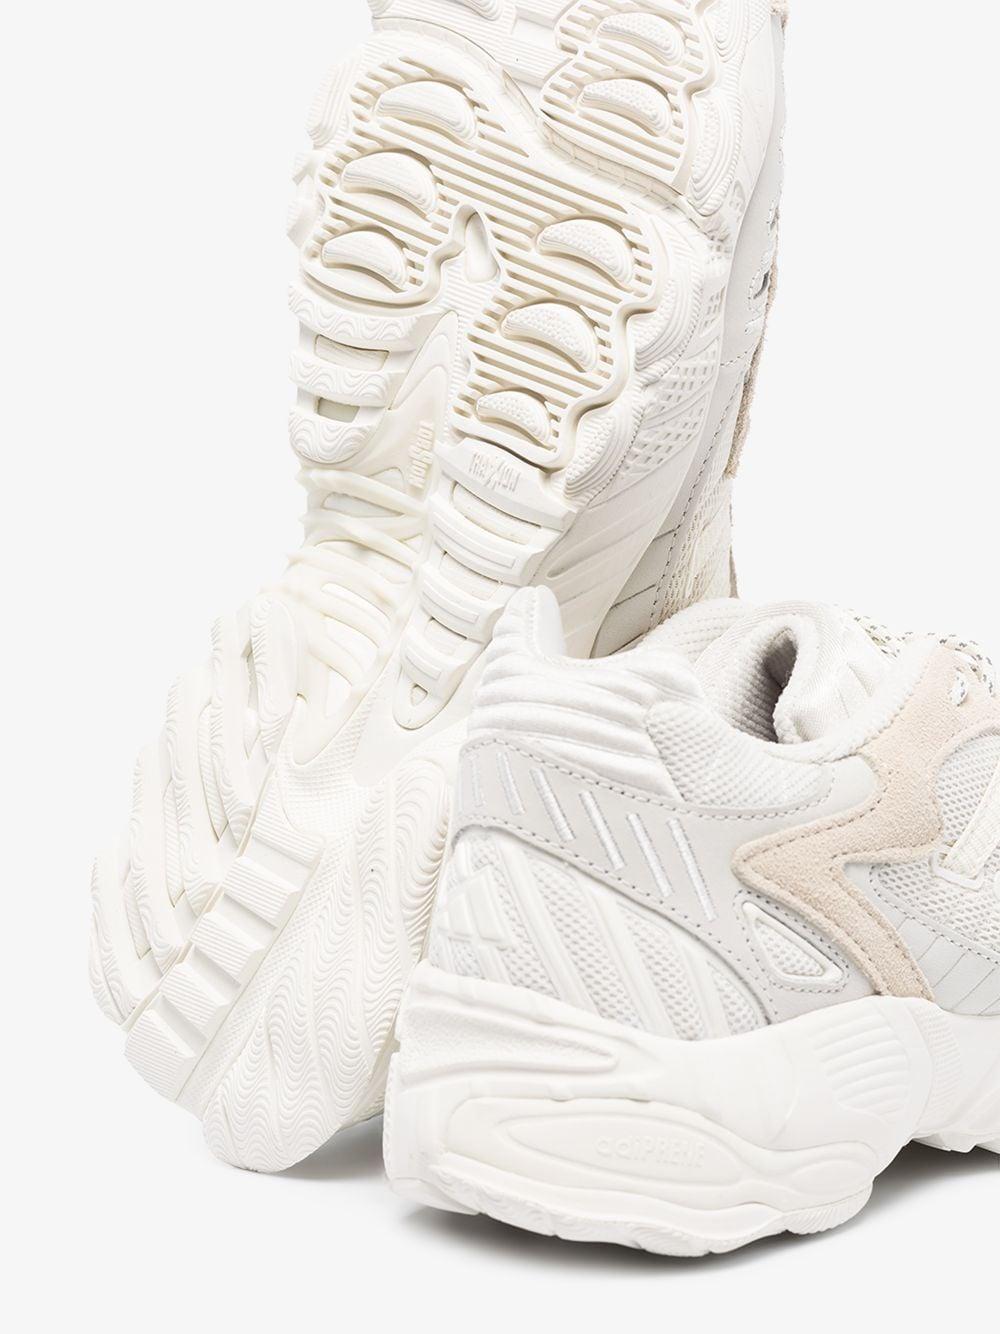 adidas torsion x chunky sneakers